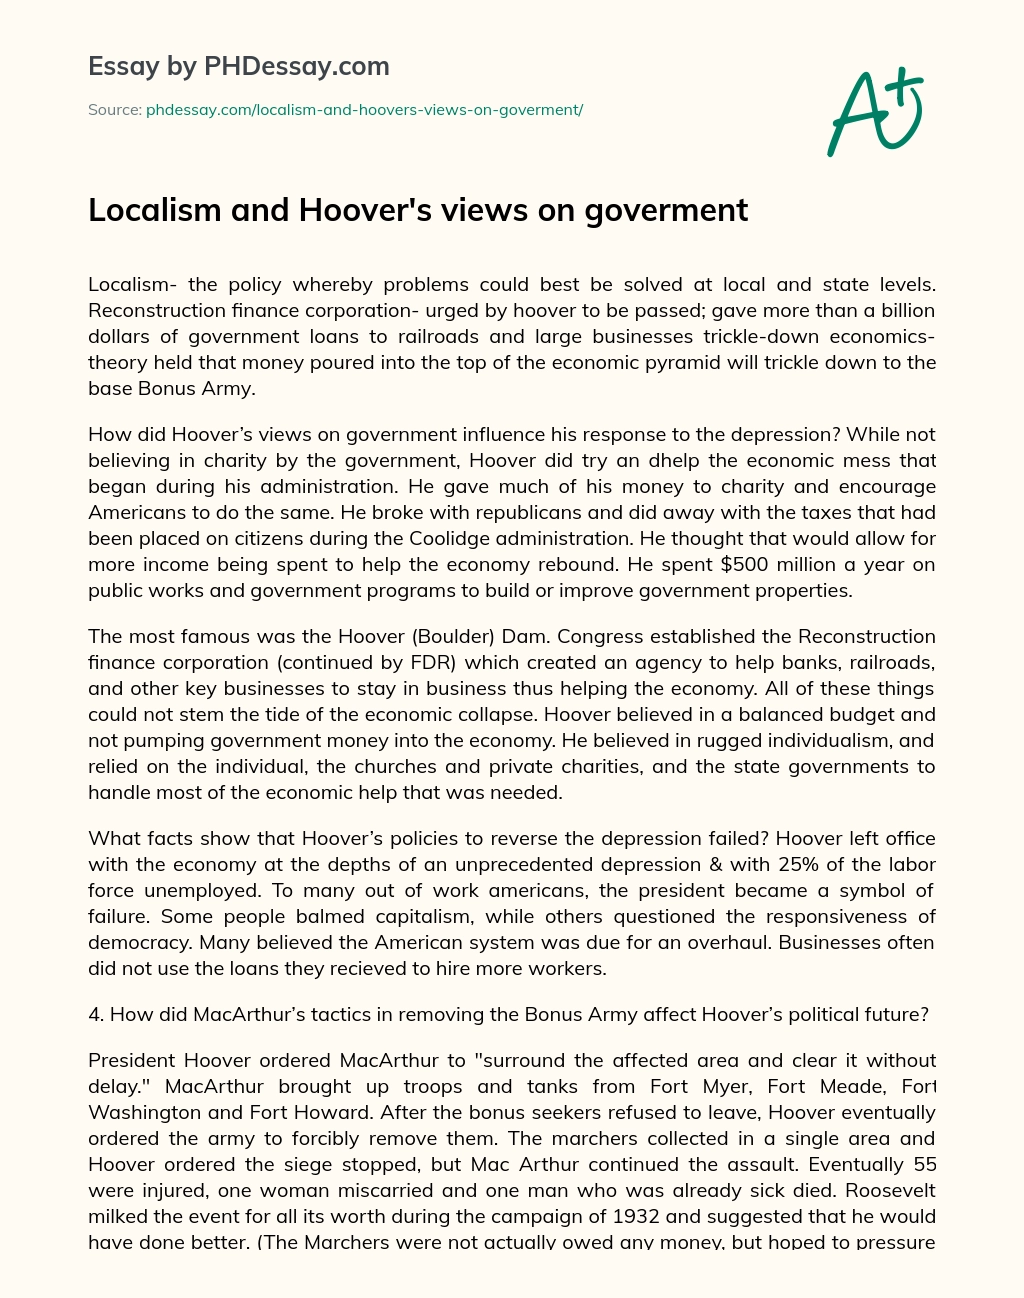 Localism and Hoover’s views on goverment essay